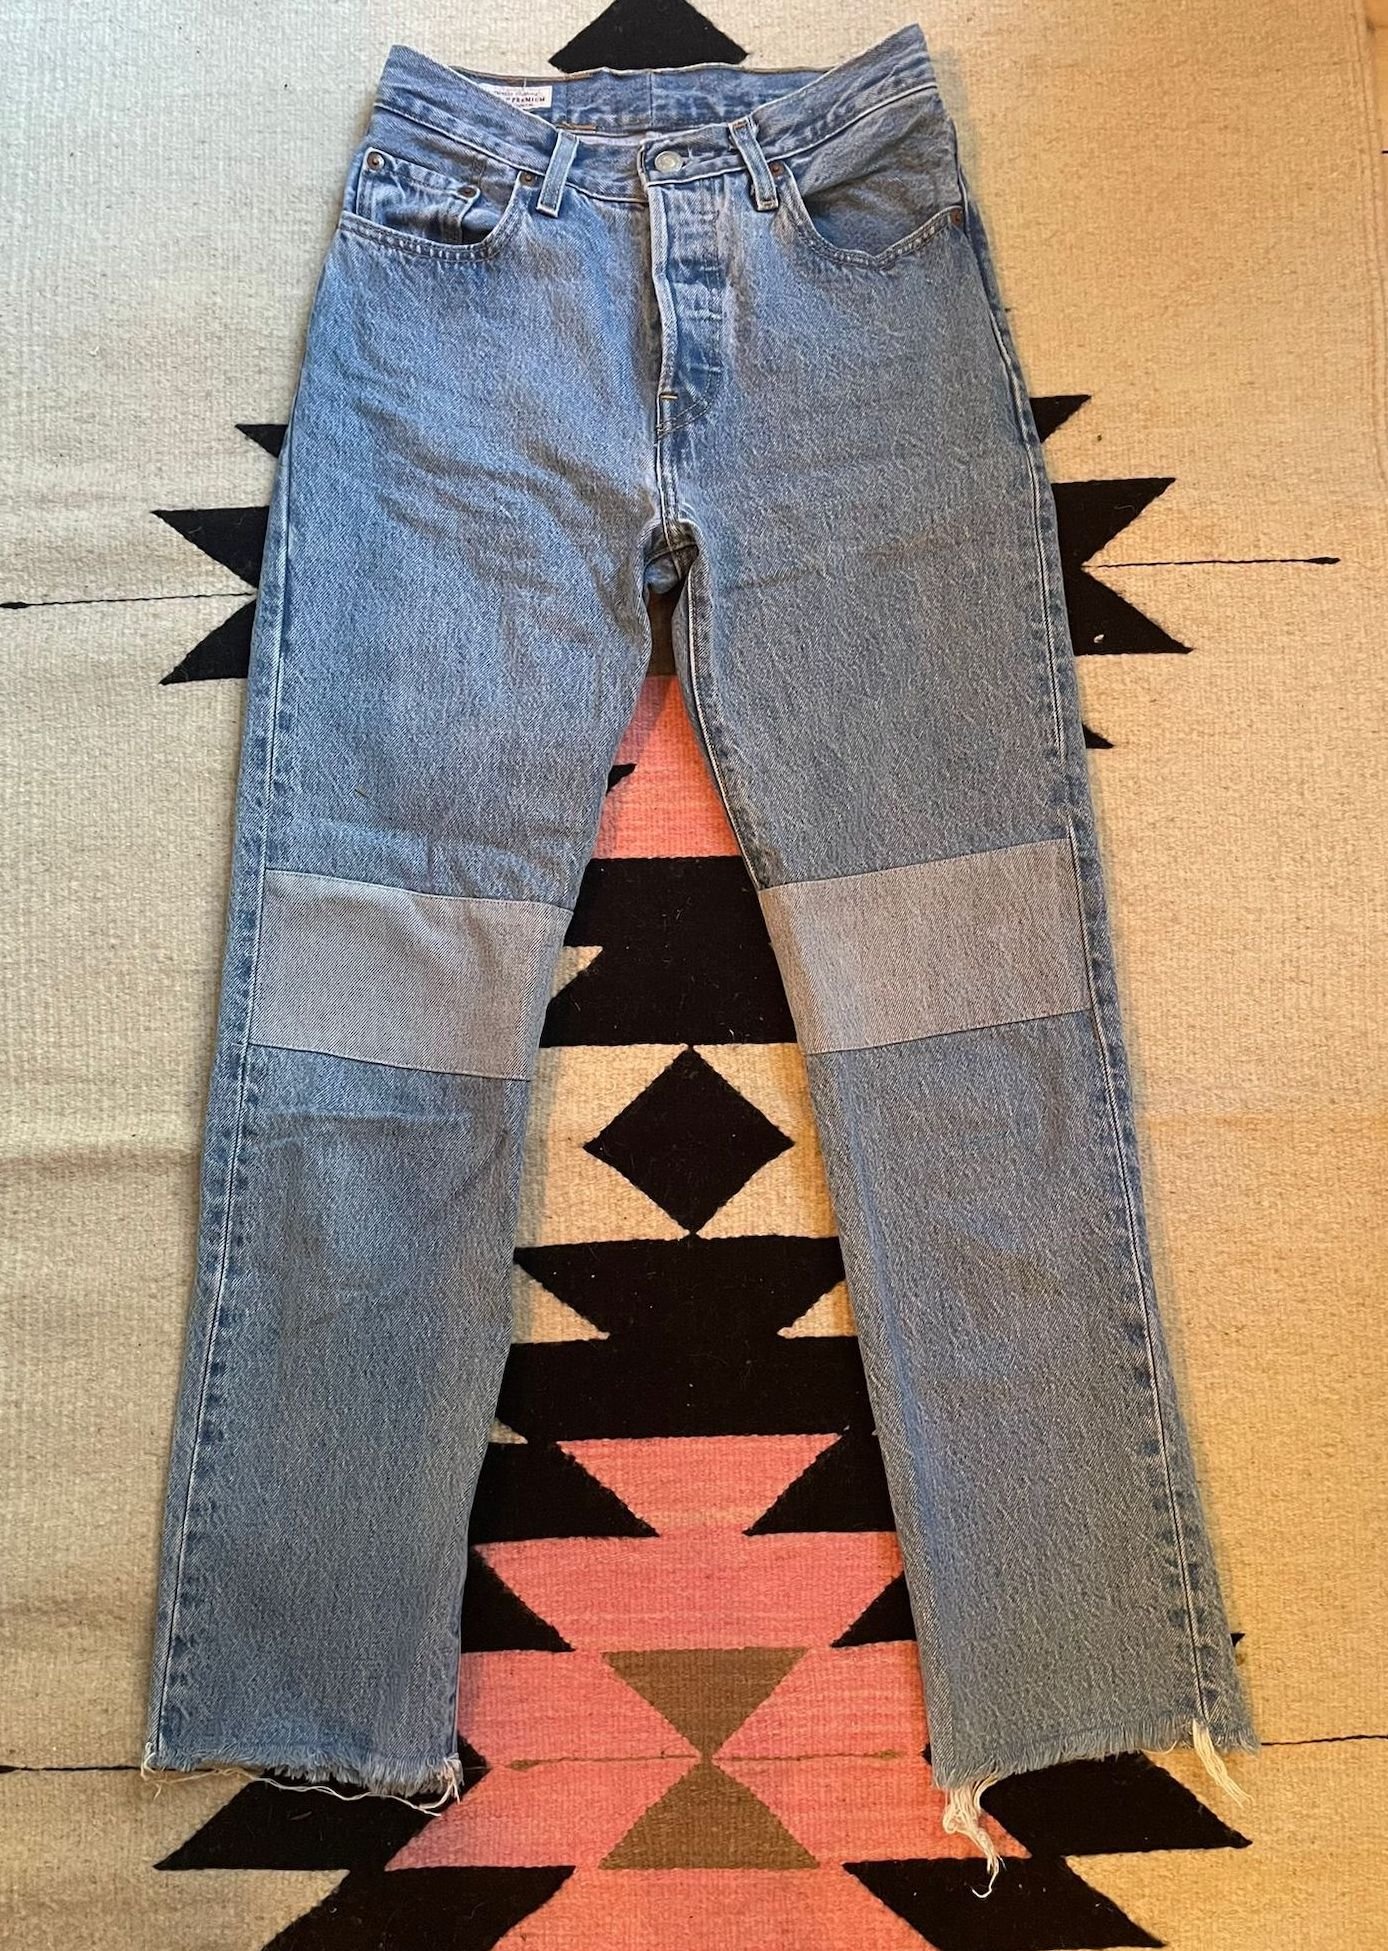 How to Fix Ripped Jeans with Visible Mending // Sashiko and Denim Patches |  Closet Core Patterns